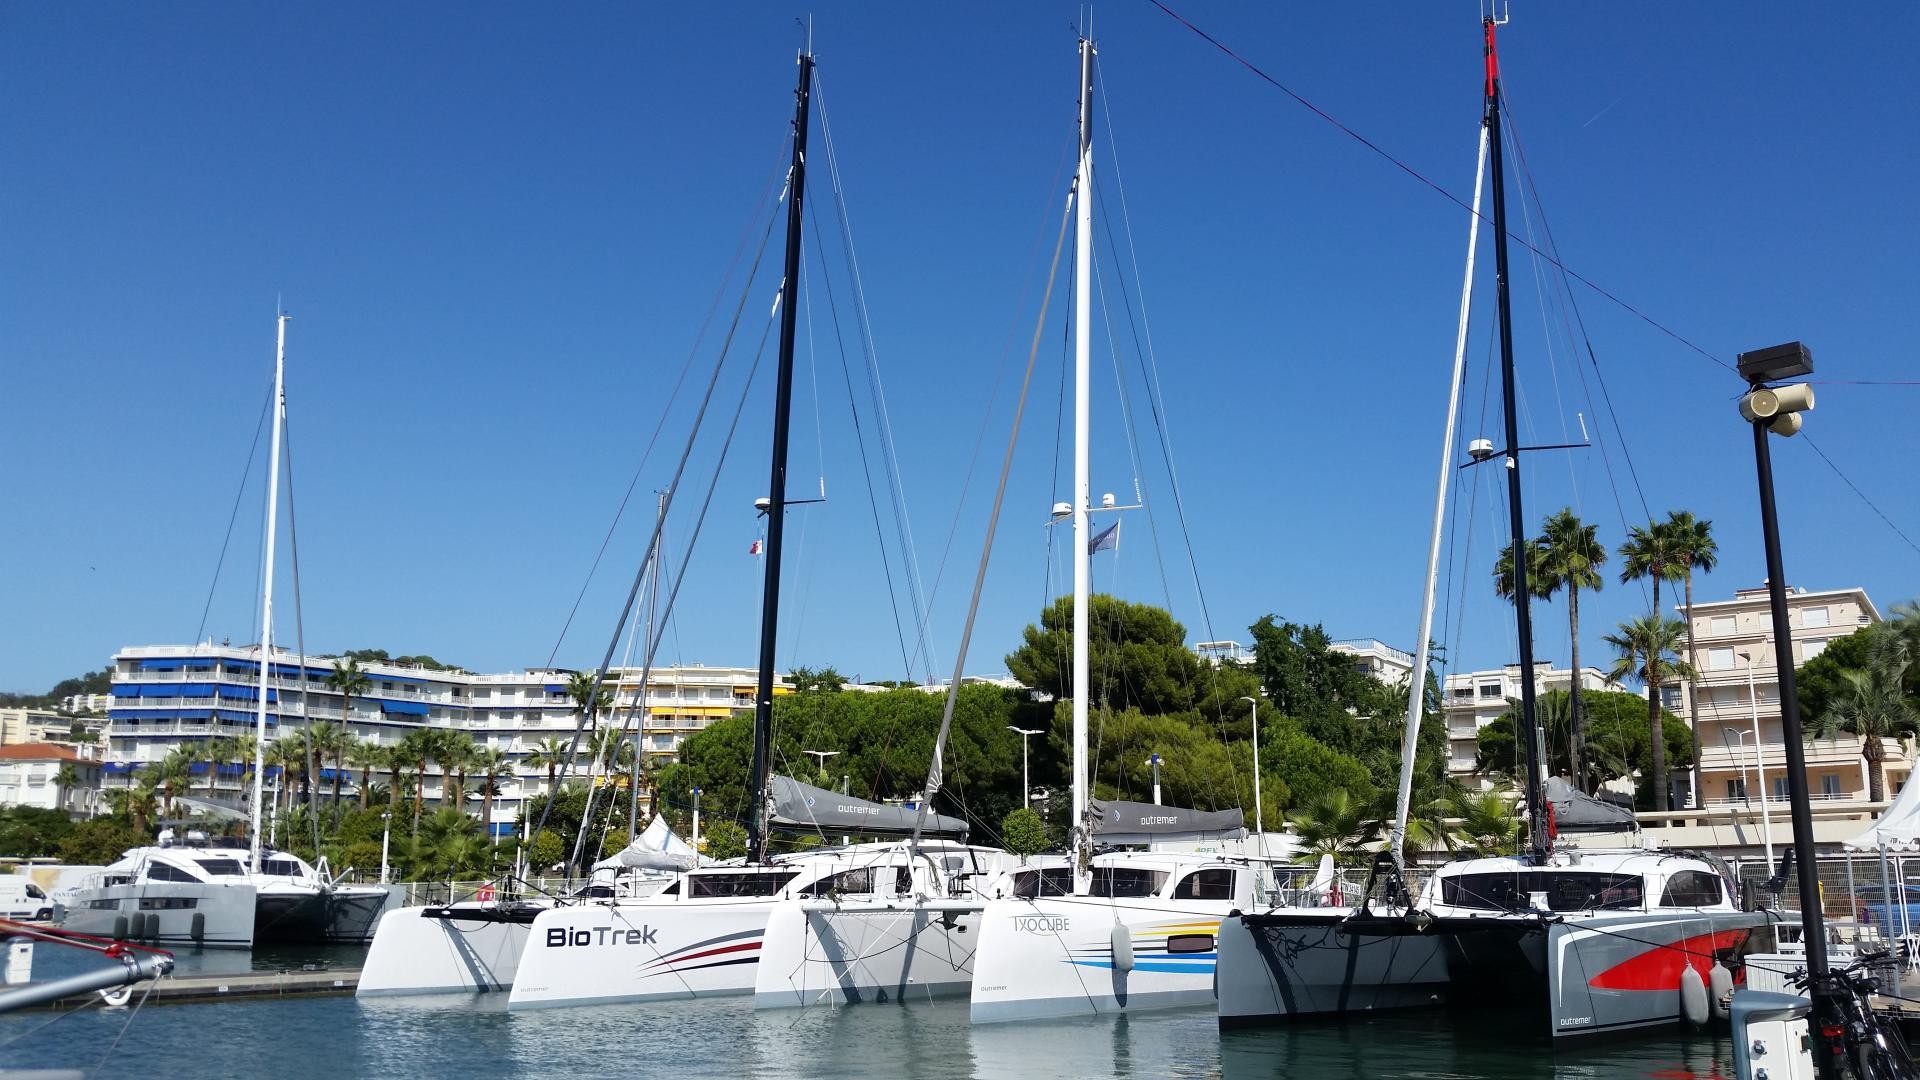 Outremer Catamarans: Let's meet in Cannes Yachting Festival